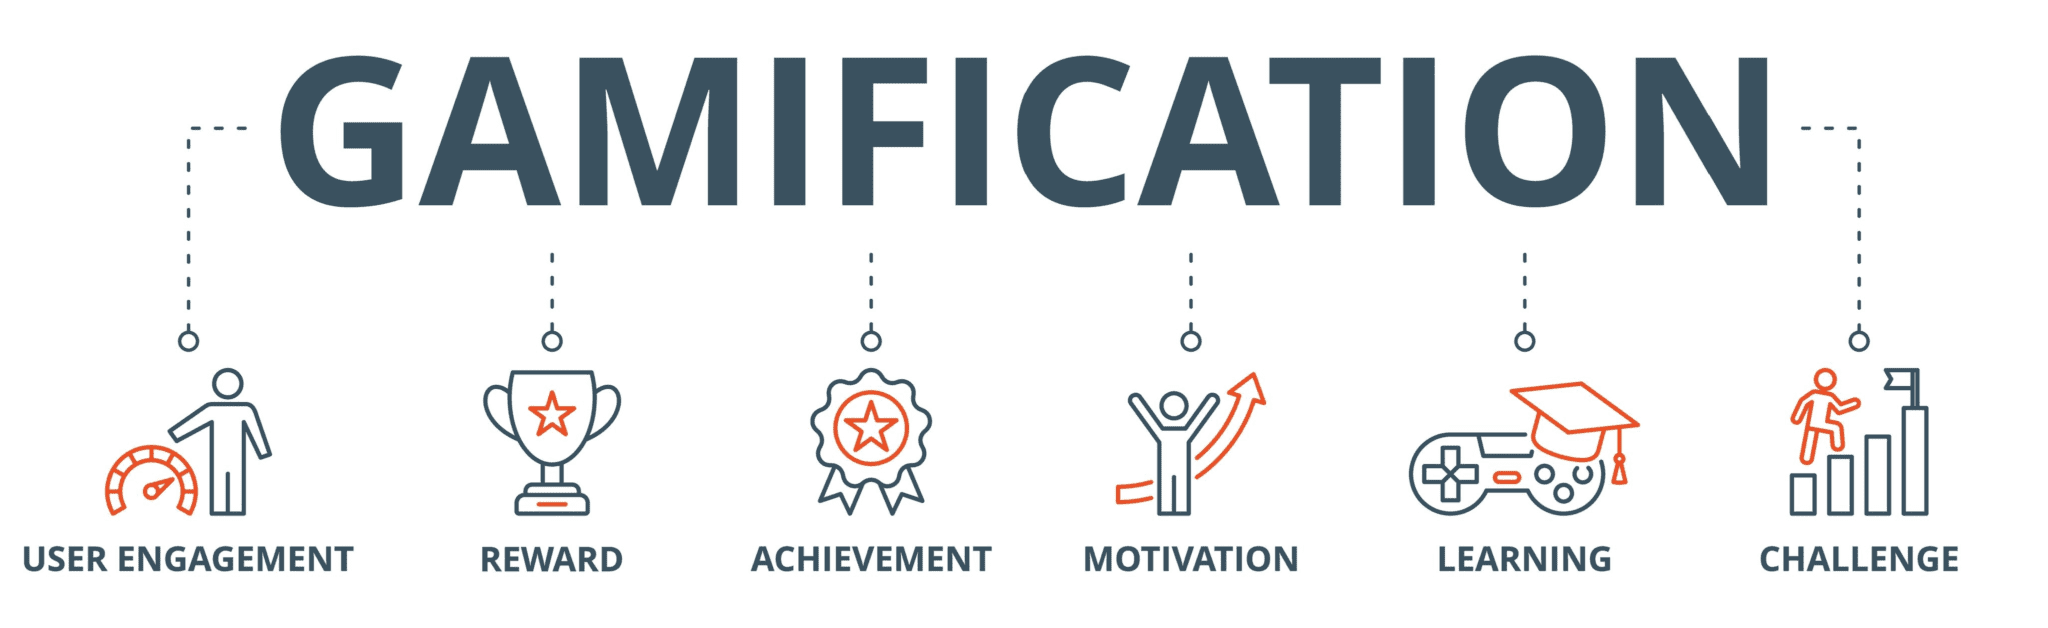 Benefits of Gamification: